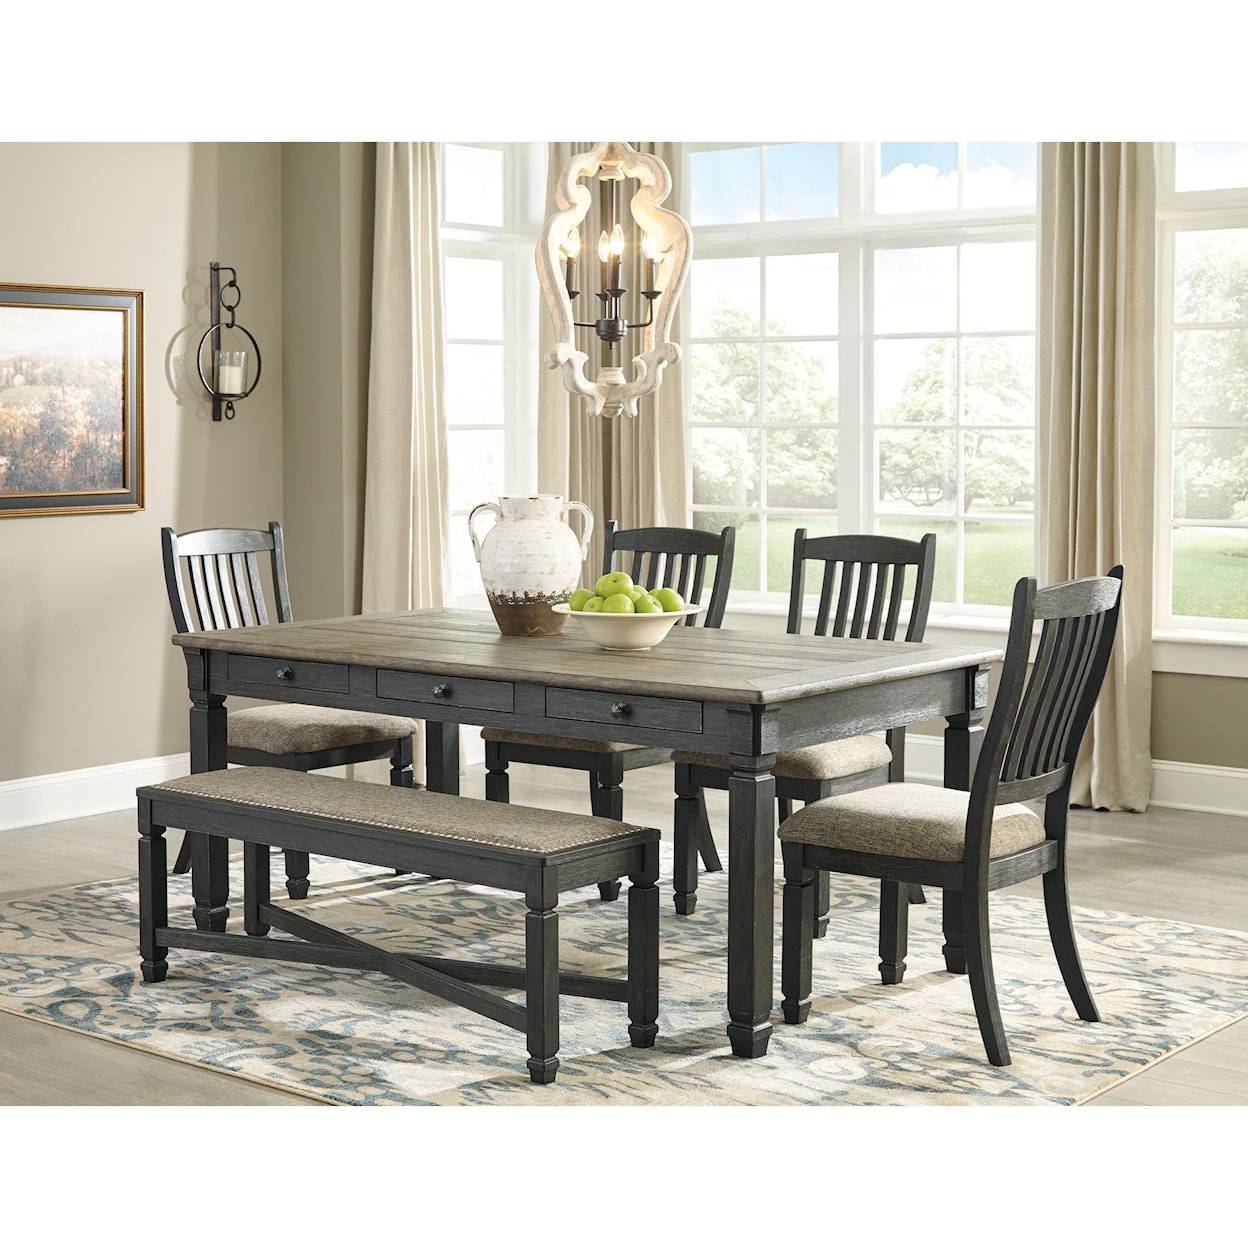 Ashley Furniture Signature Design Tyler Creek Table and Chair Set with Bench